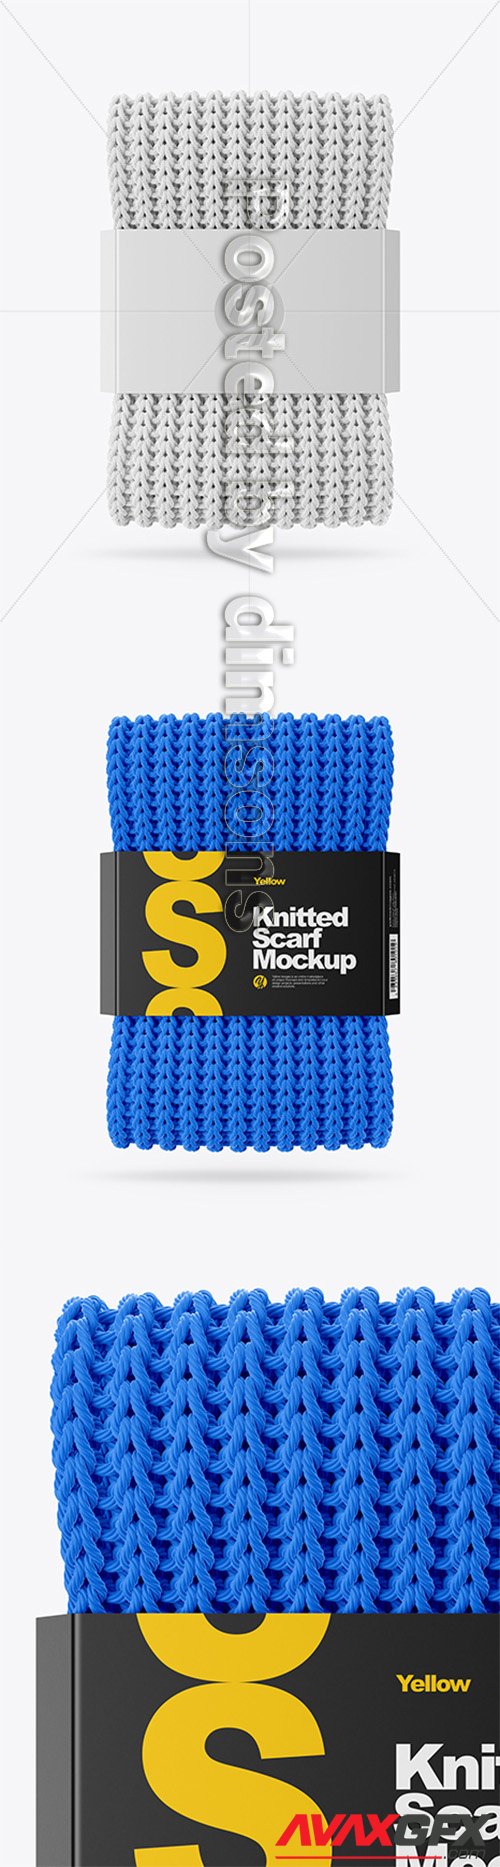 Knitted Scarf With Paper Label Mockup 29362